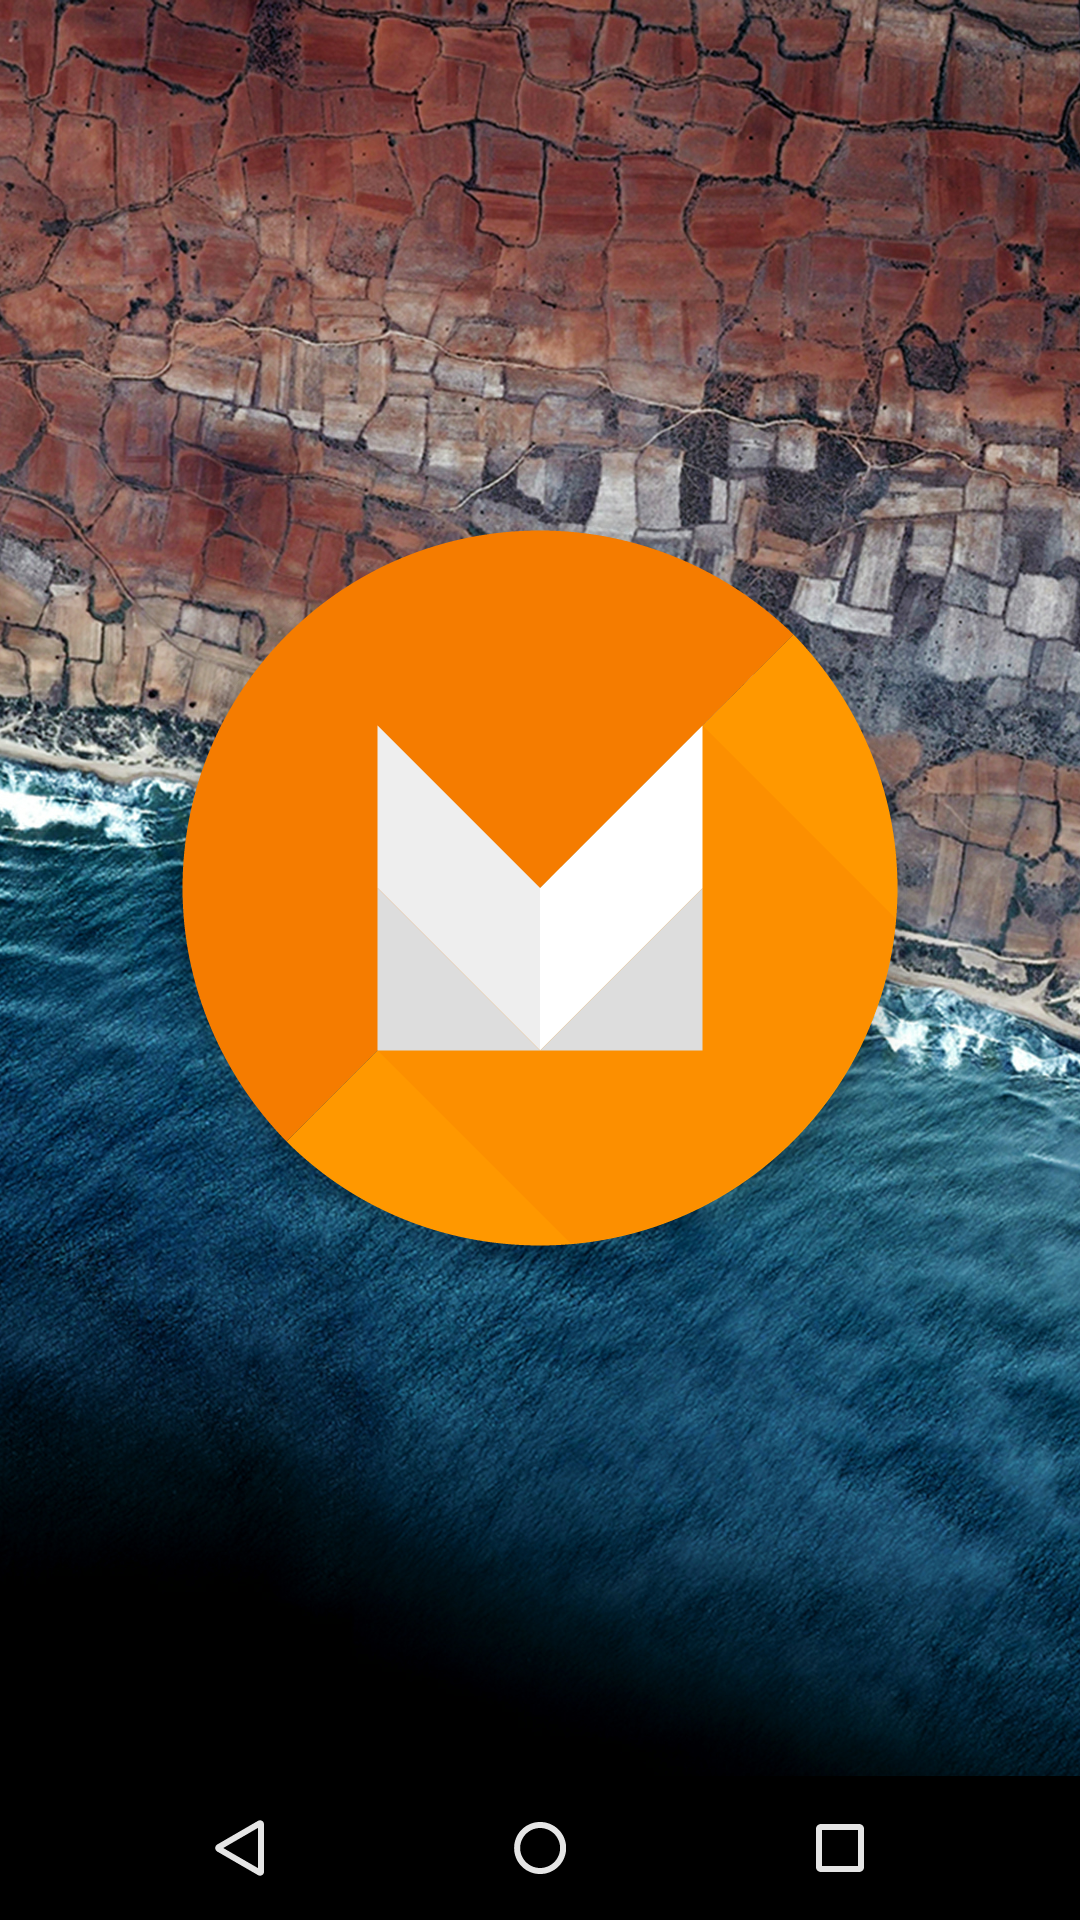 Android 6.0 Marshmallow – 10 new features